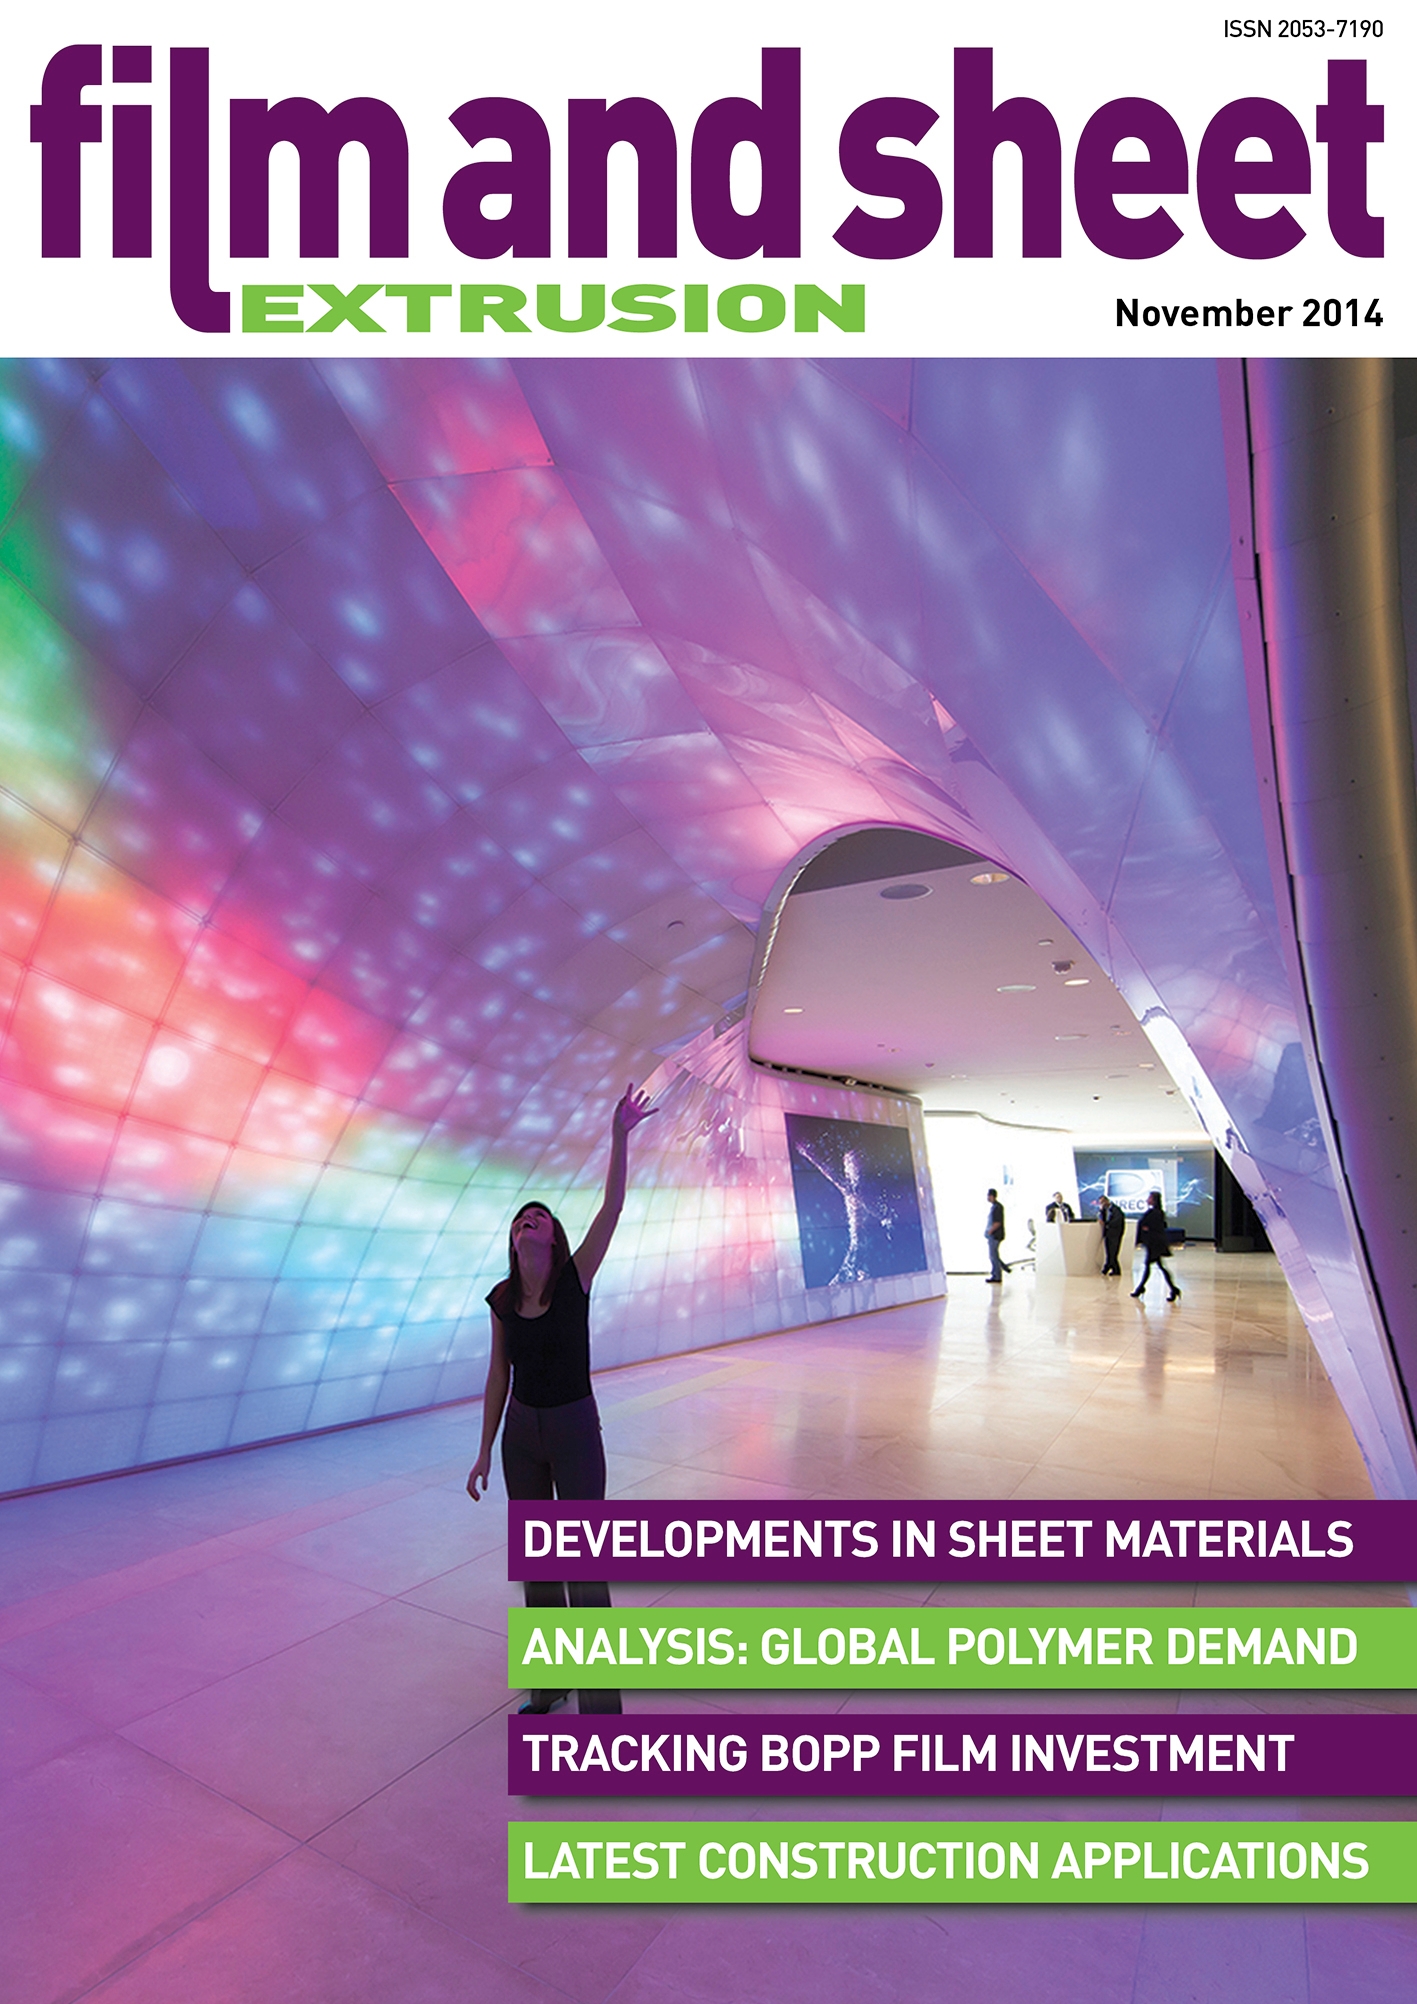 Film and Sheet Extrusion November 2014